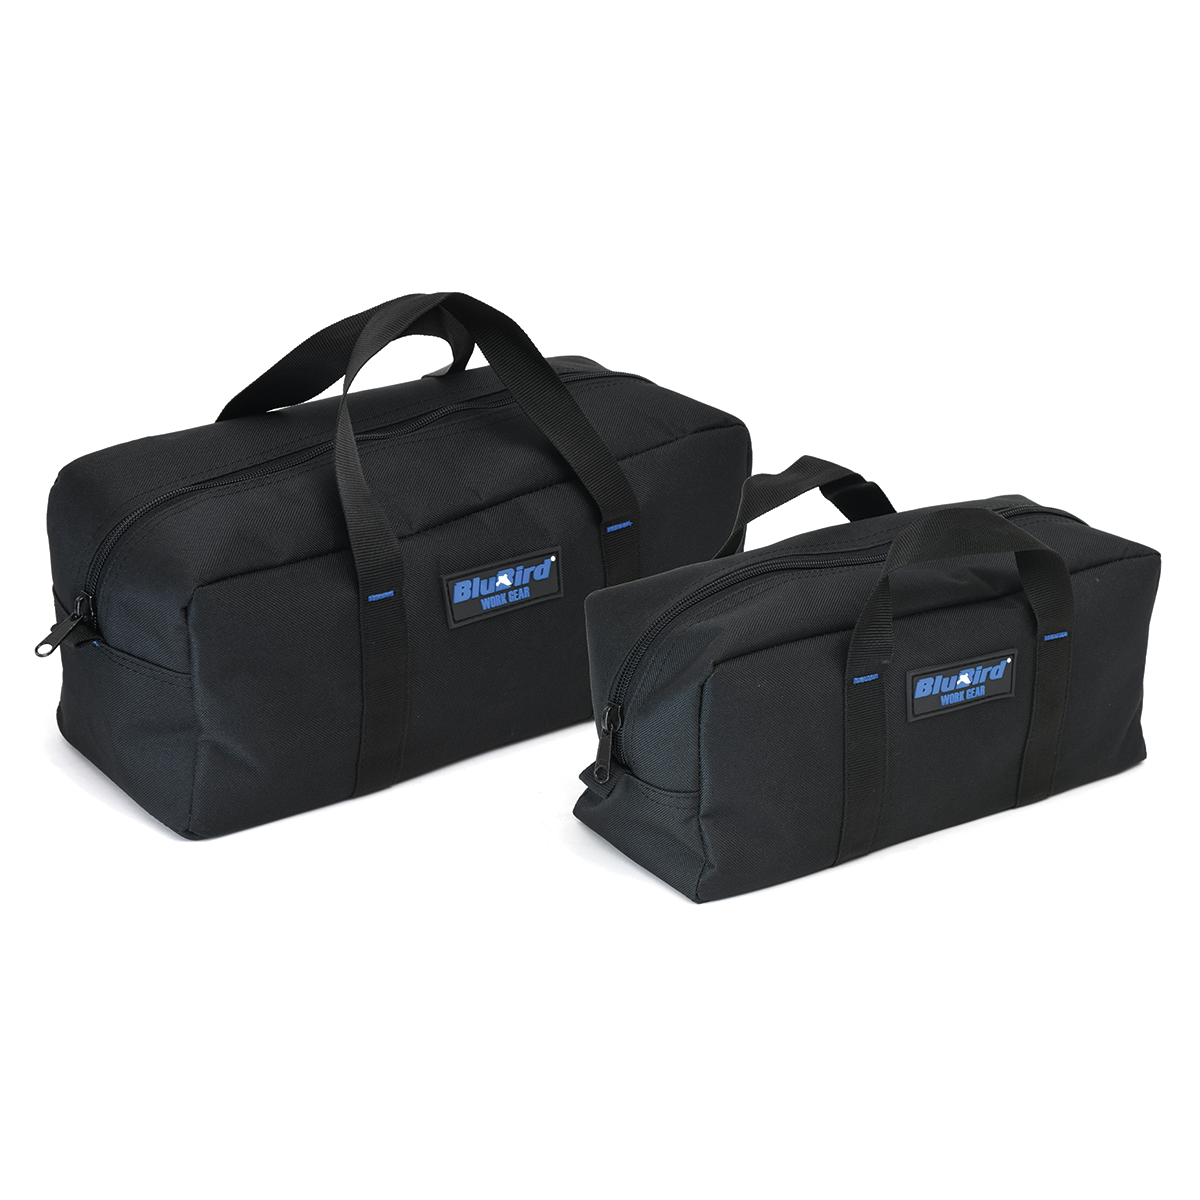 BluBird Work Gear Large and Medium Utility Tote Bag Combo